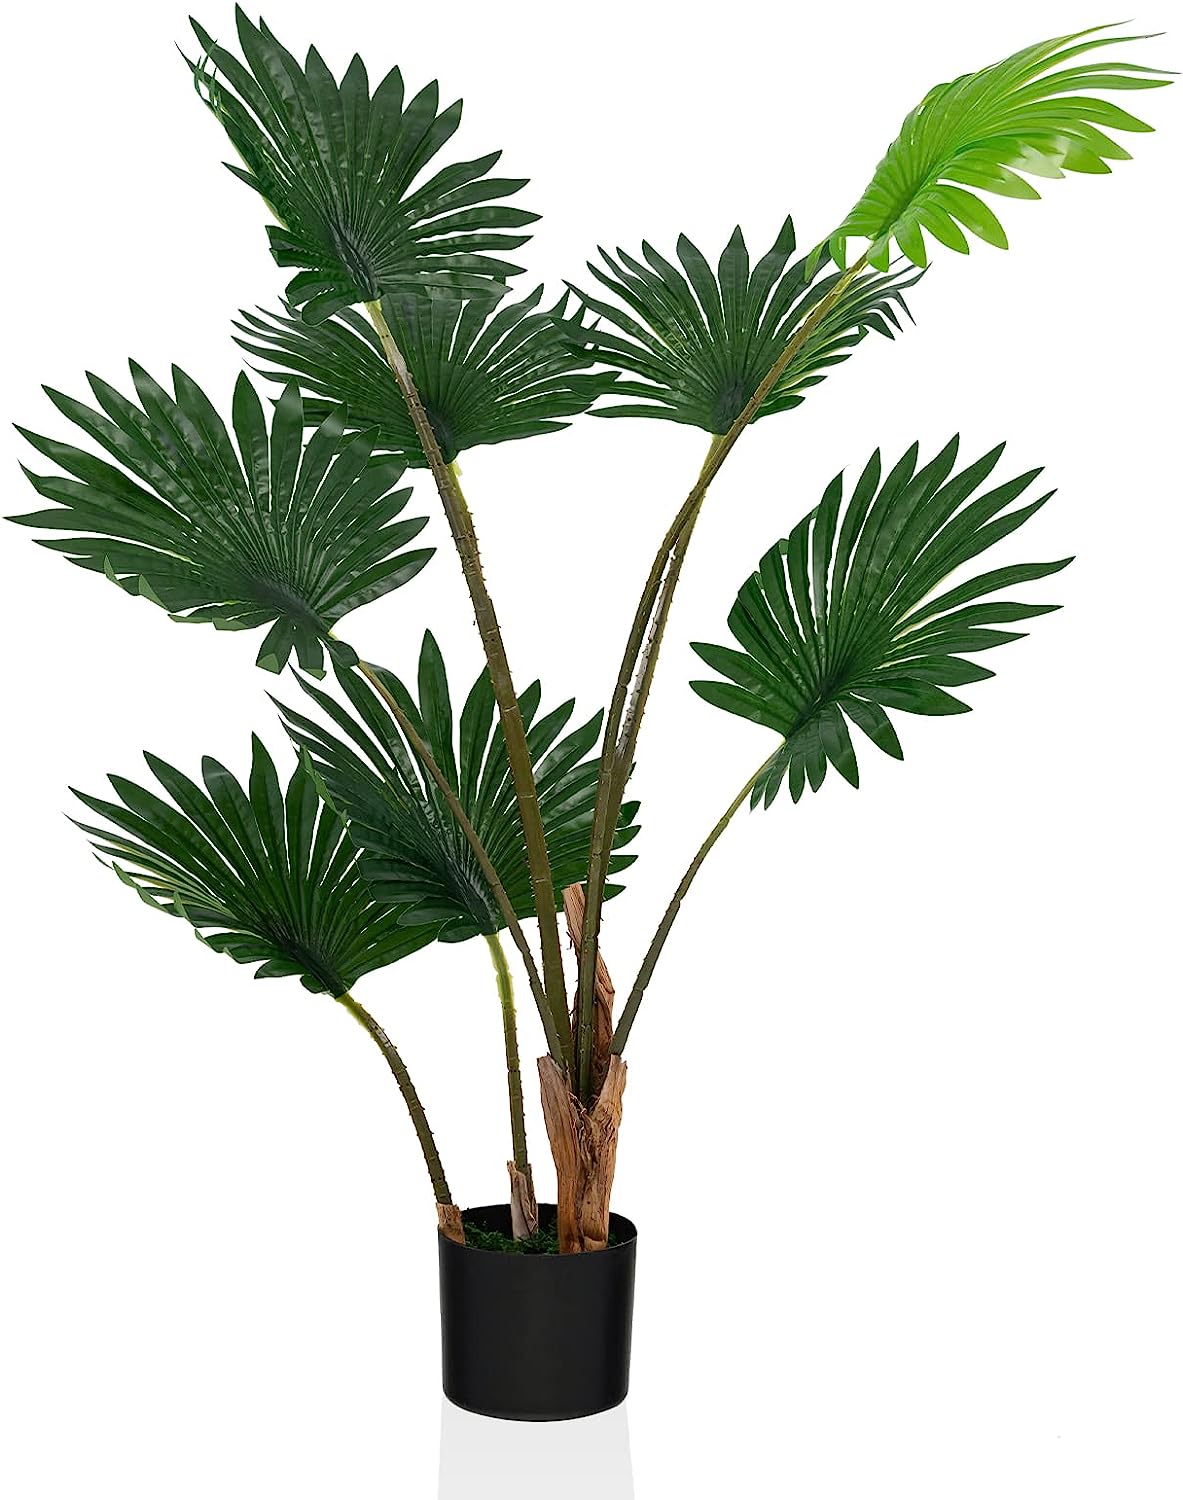 4ft Artificial Fan Palm Tree, with 8 Large Leaves. Graceland Home and Living